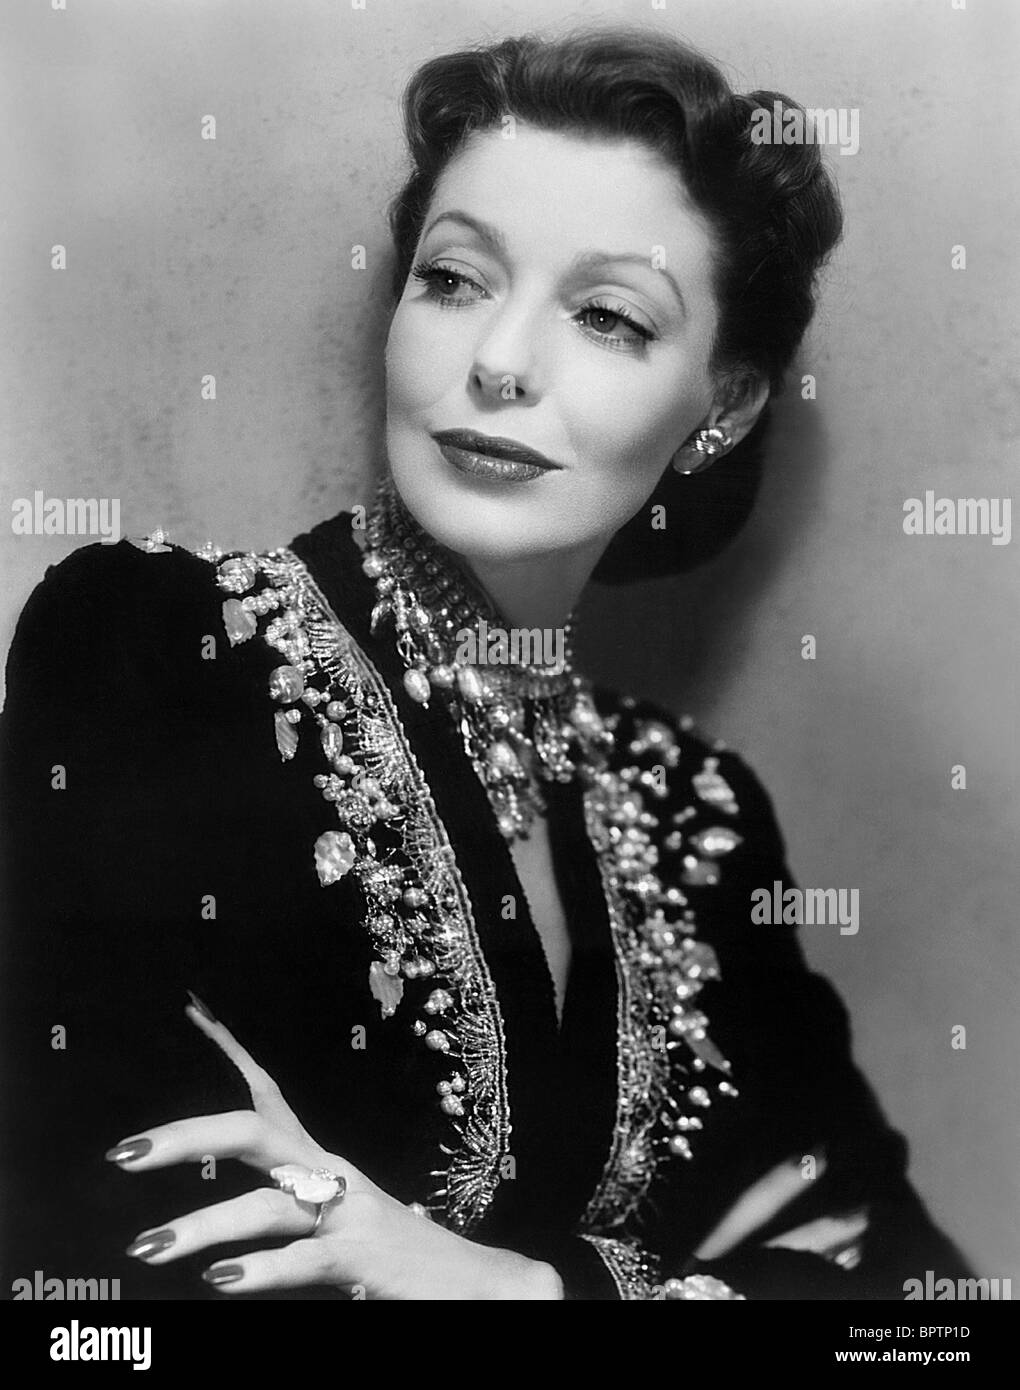 L'ACTRICE LORETTA YOUNG (1950) Banque D'Images